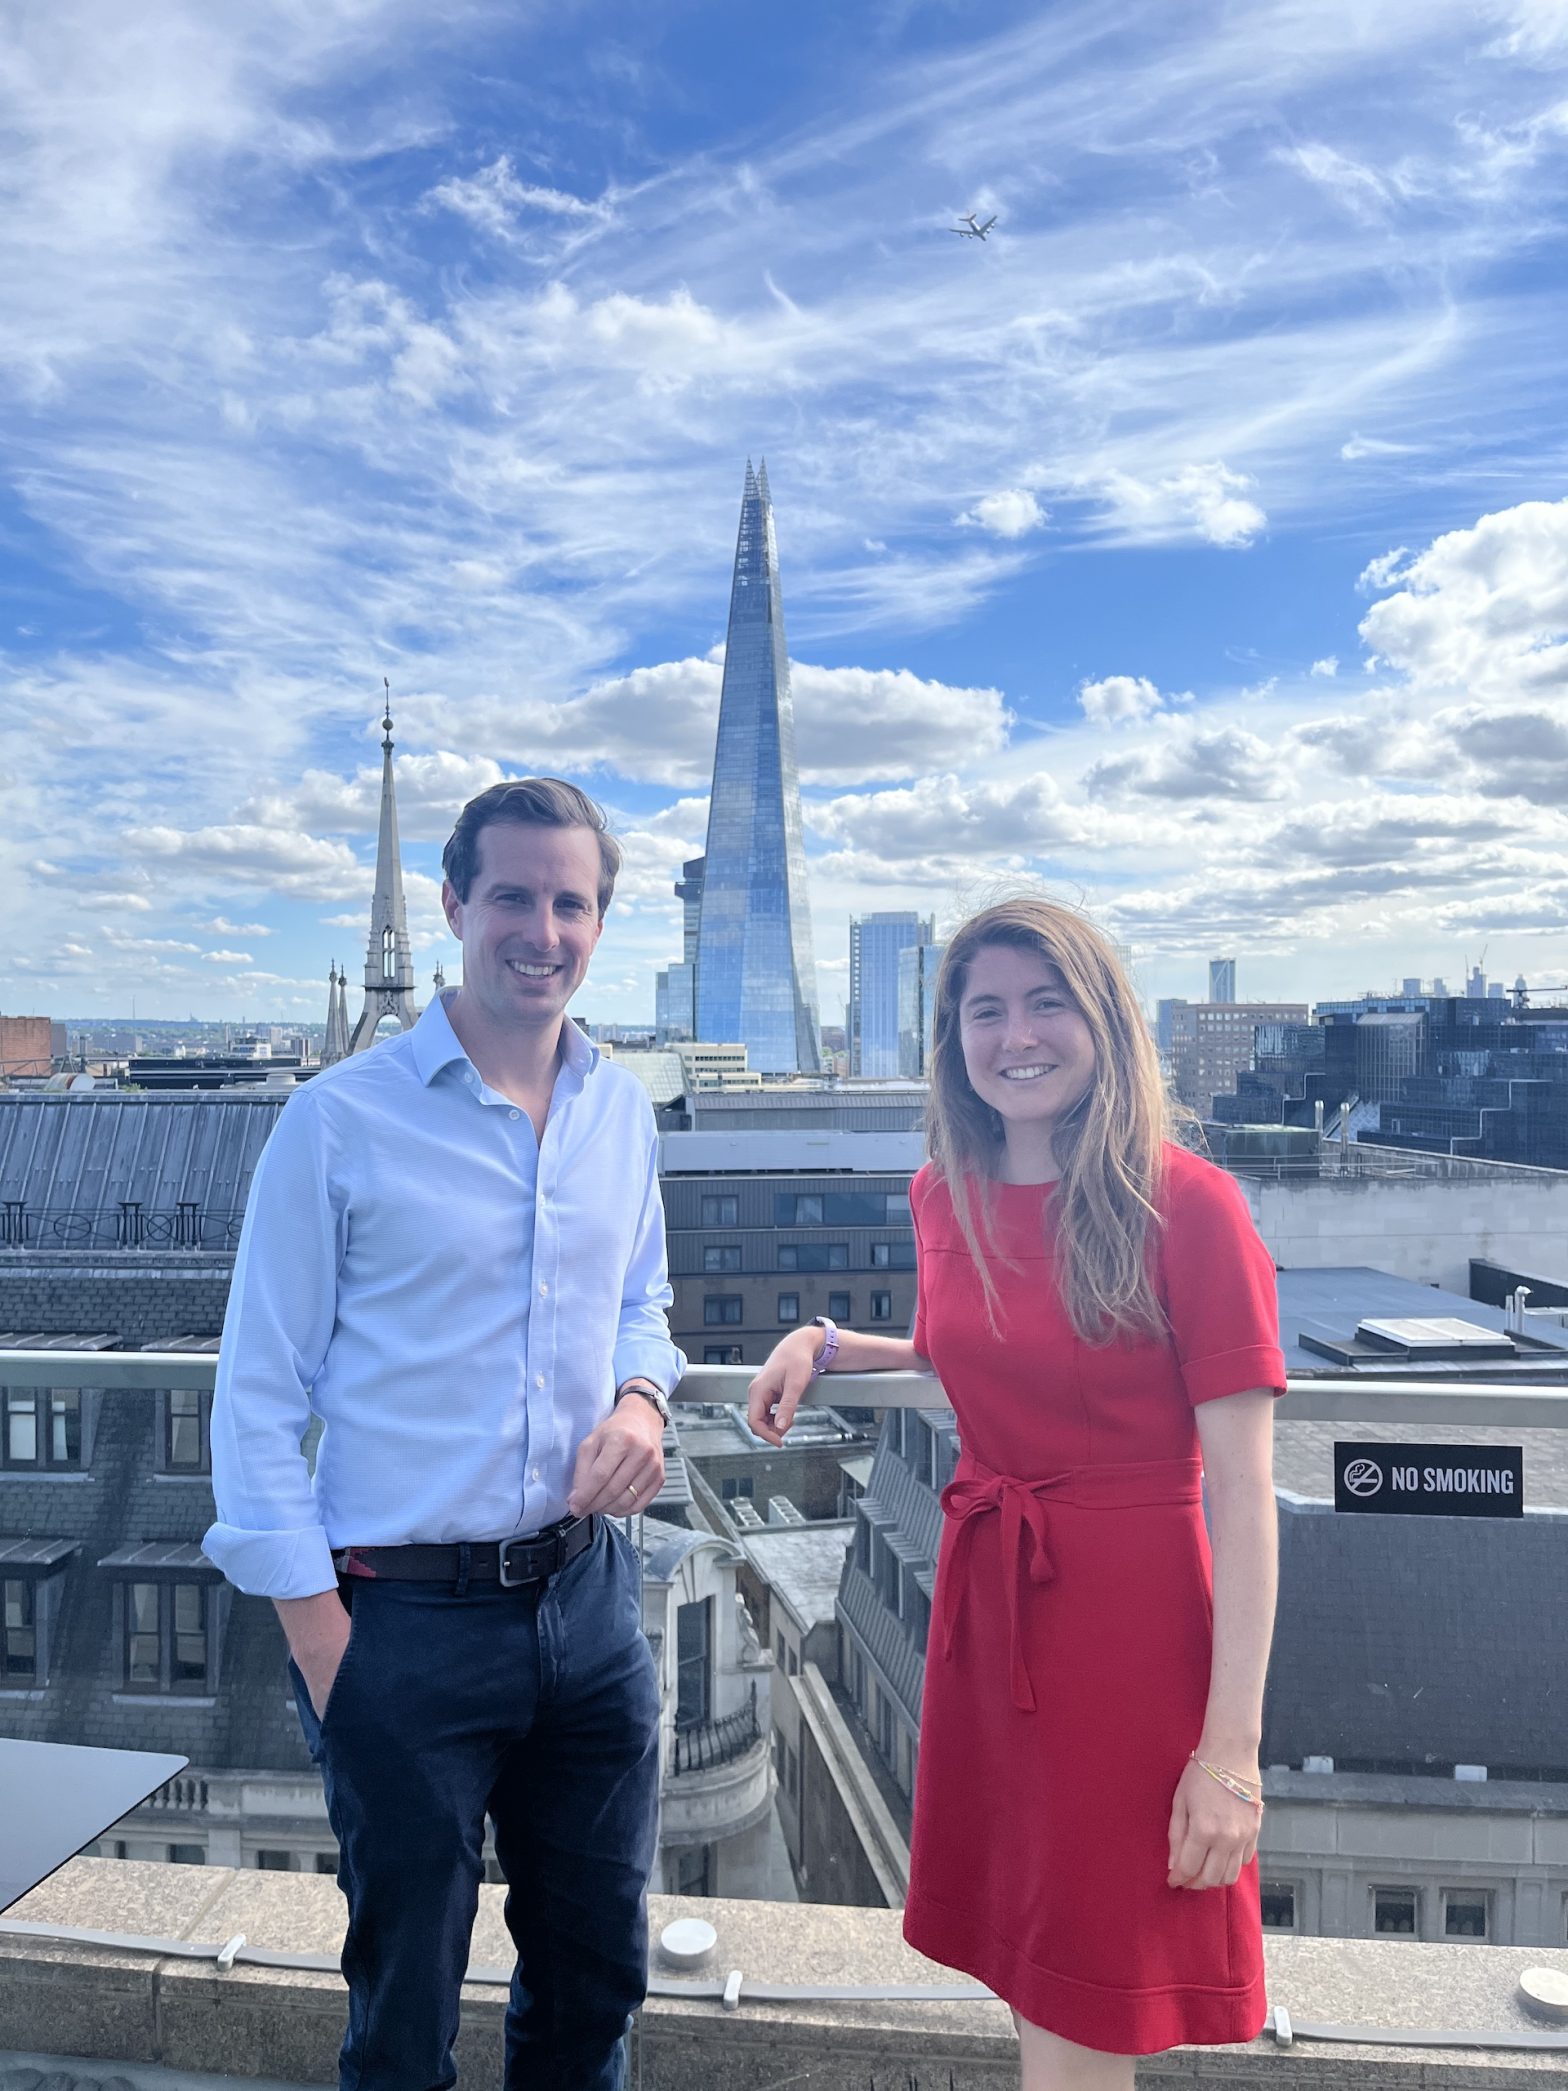 Scaling up: London, here we come!